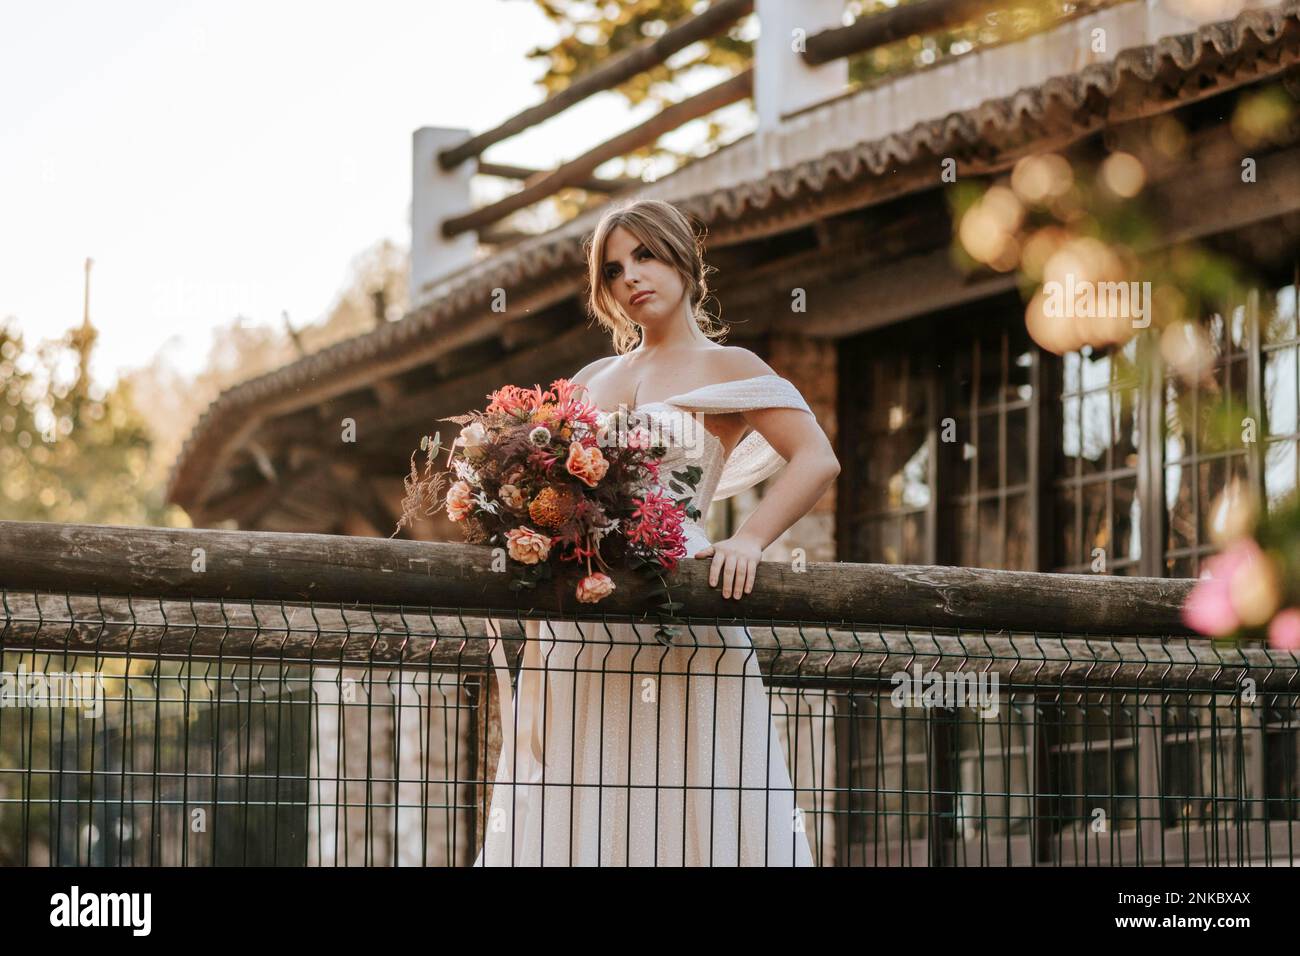 Beautiful bride standing on wooden rustic bridge over a river at sunset time Stock Photo